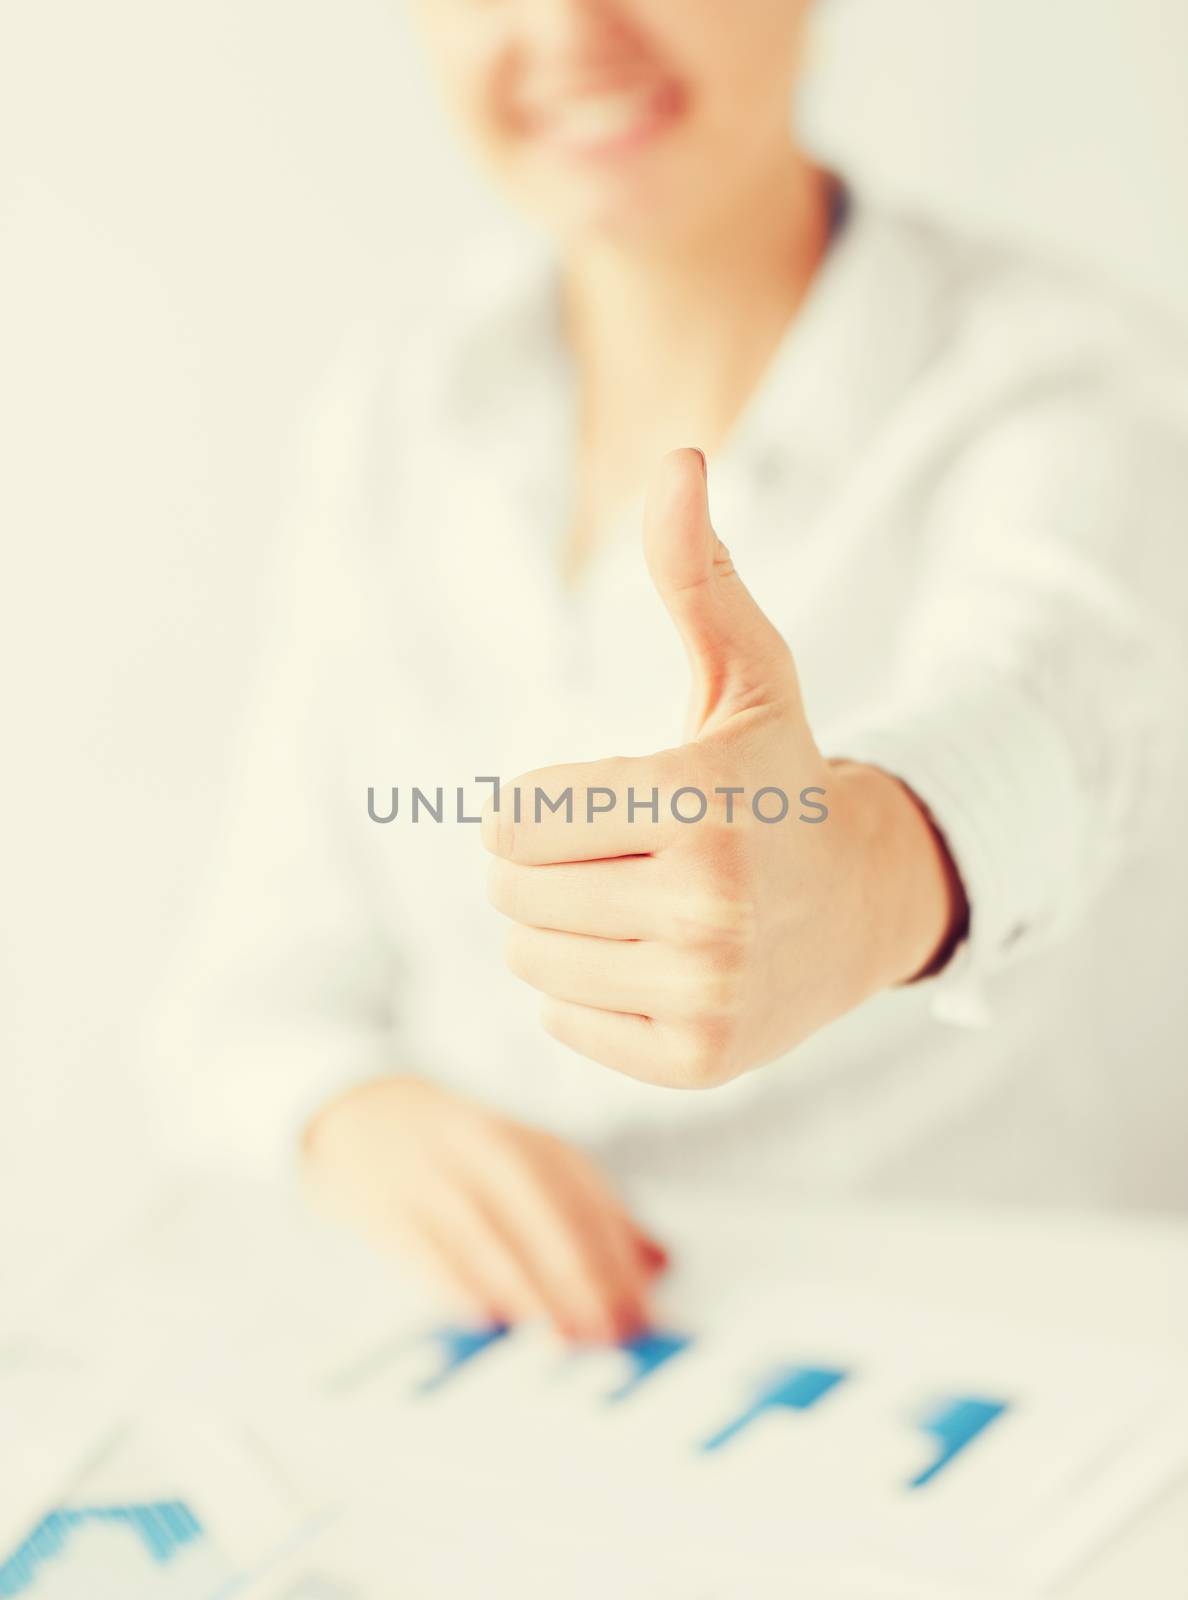 business, office, school and education concept - happy woman with charts, papers and thumbs up